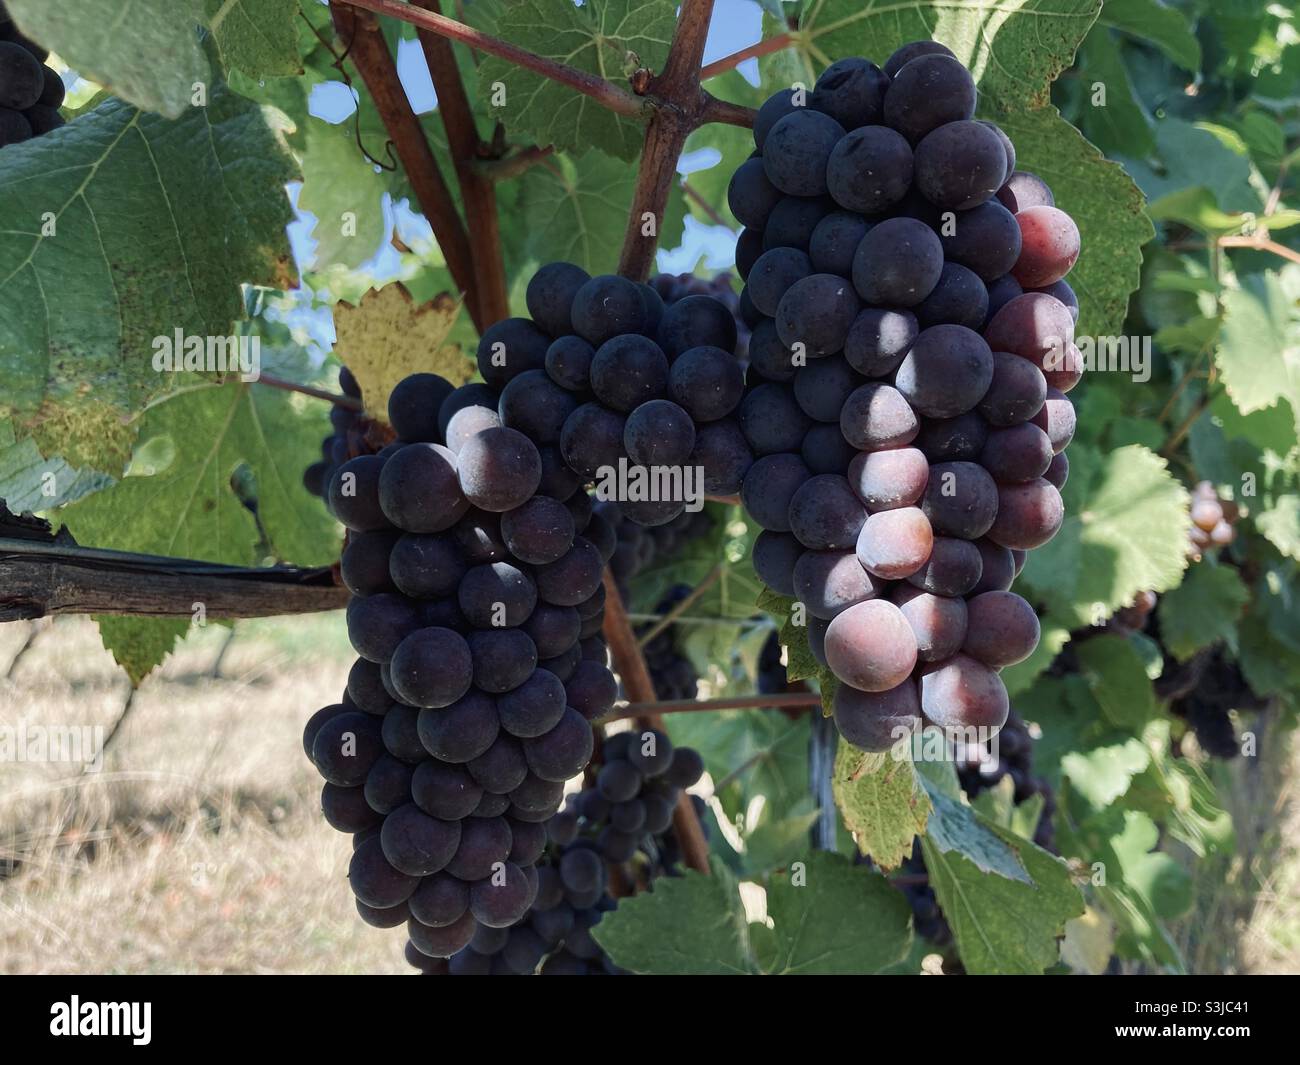 Sun shine on Pinot gris grapes during harvest in Oregon’s Willamette Valley. Stock Photo